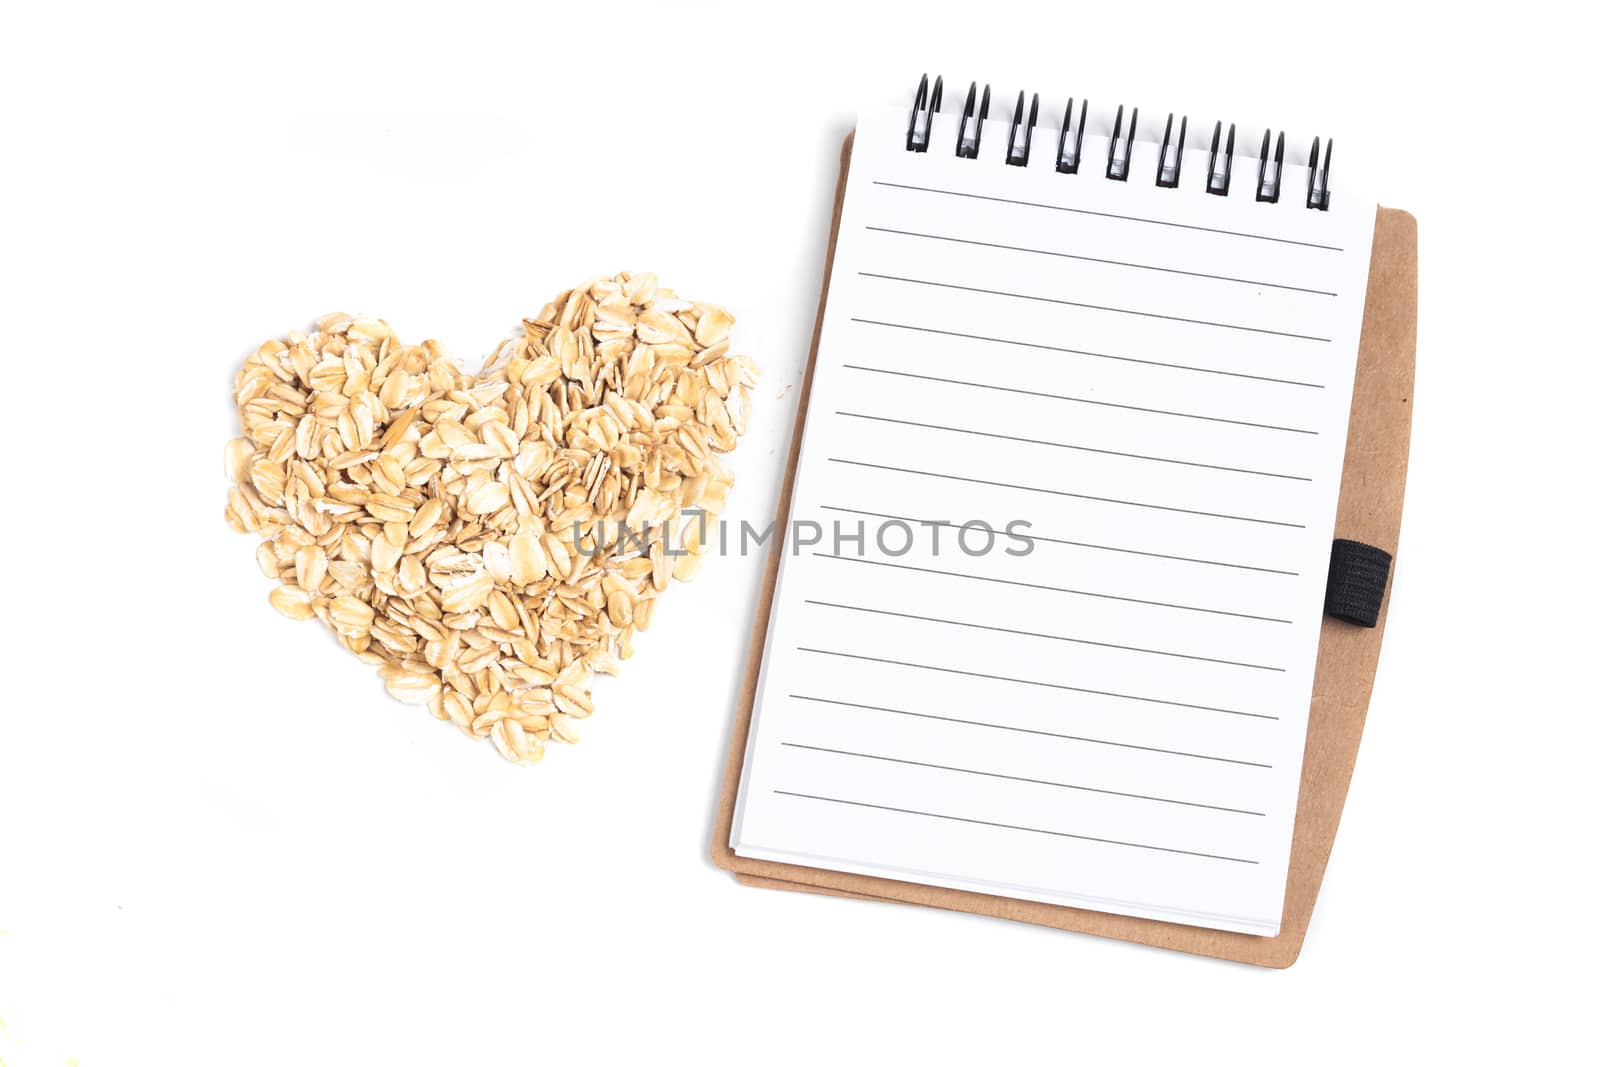 oat flakes in a shape of heart and book note by amnarj2006